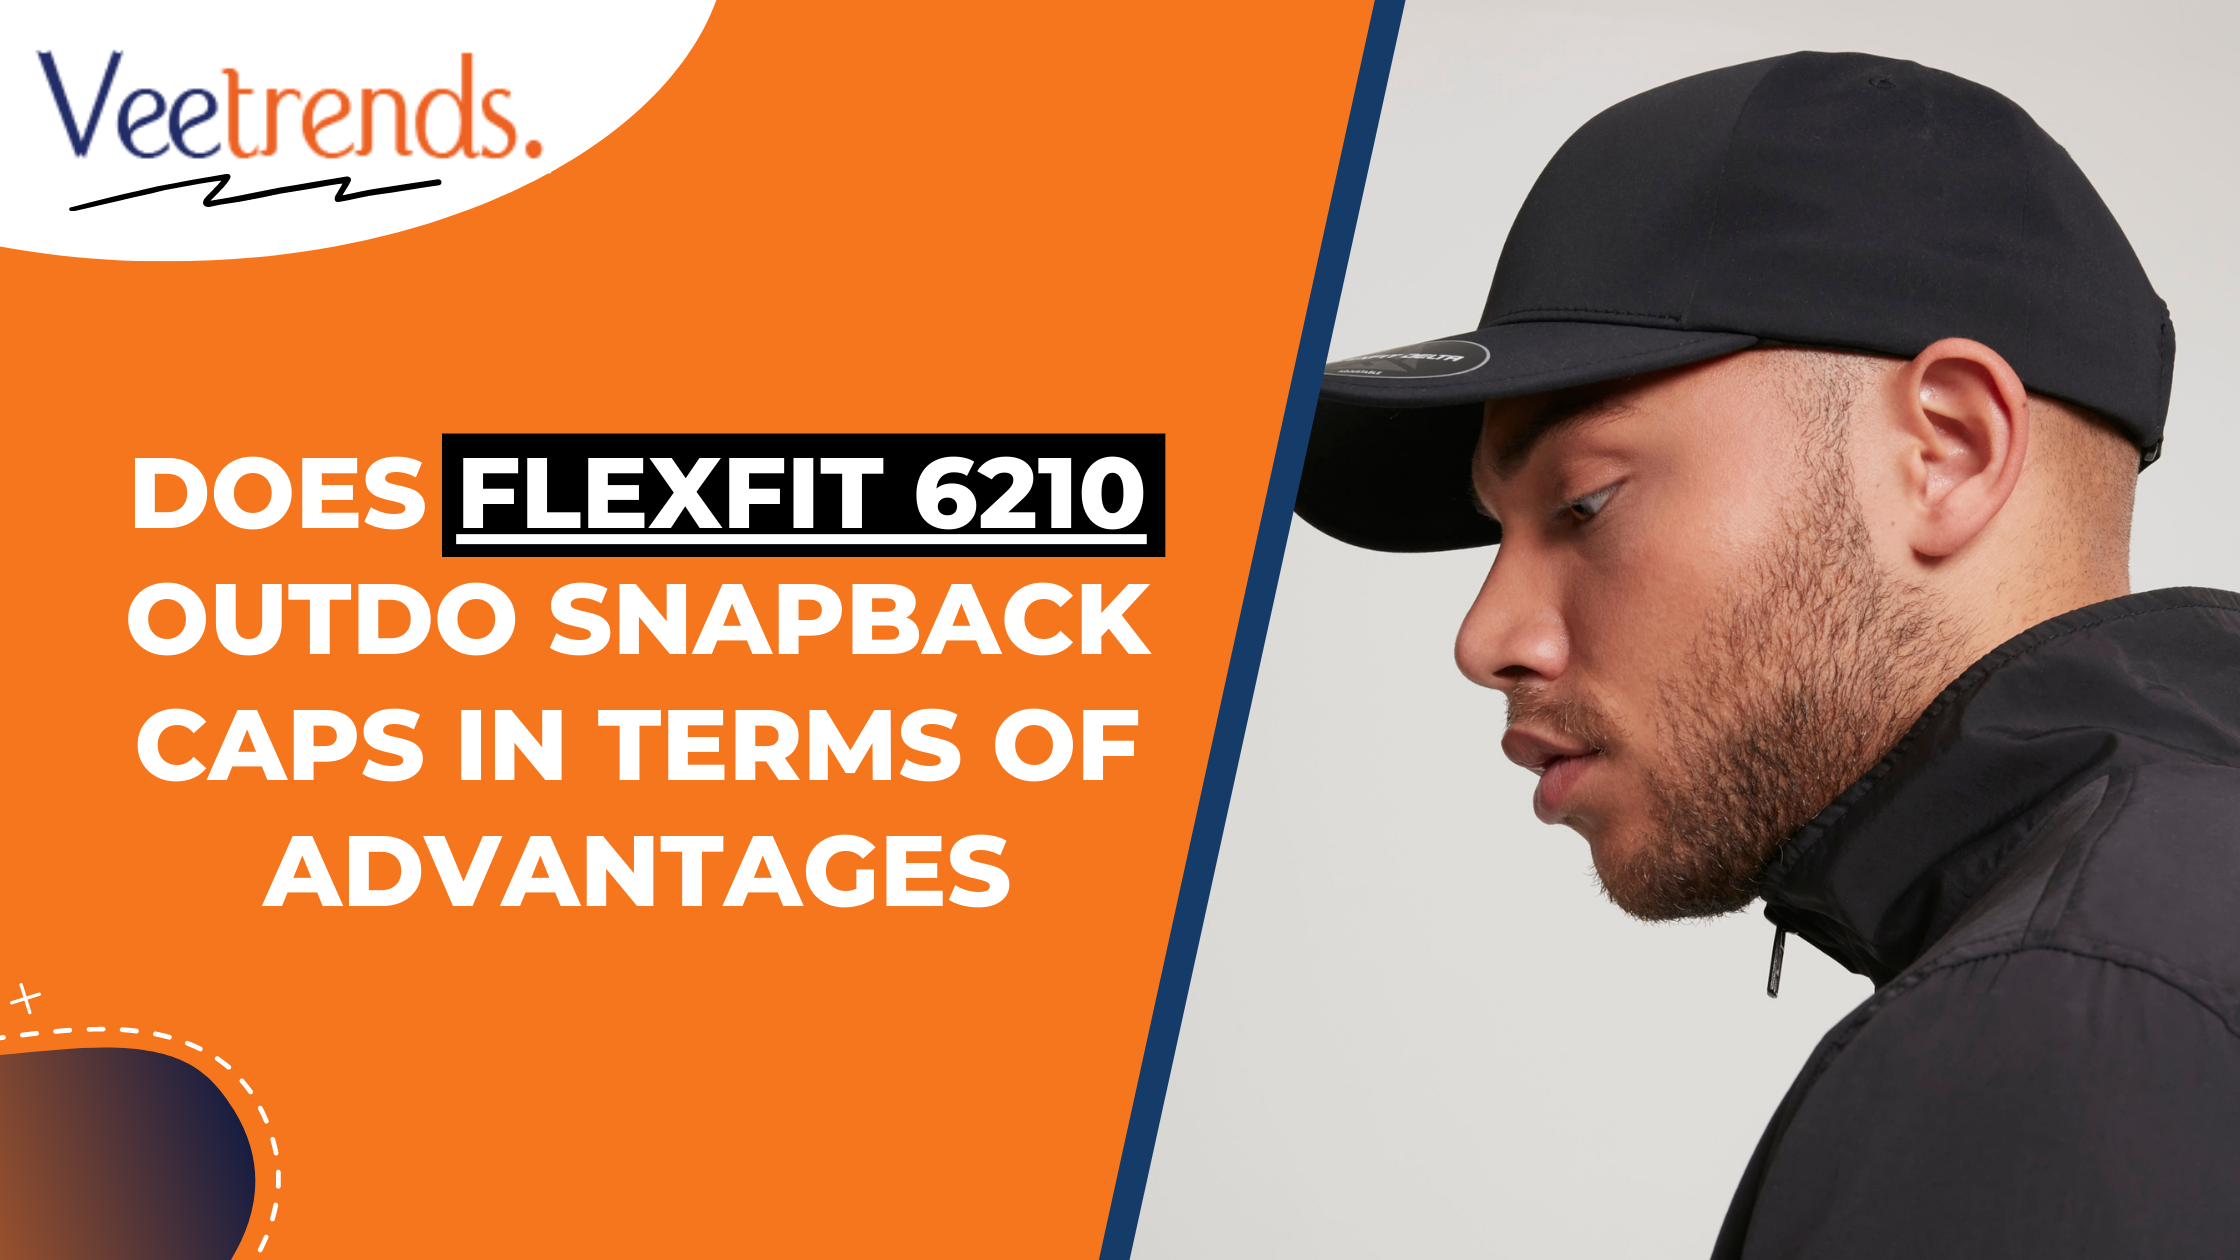 Does Flexfit 6210 Outdo Snapback Caps In Terms of Advantages